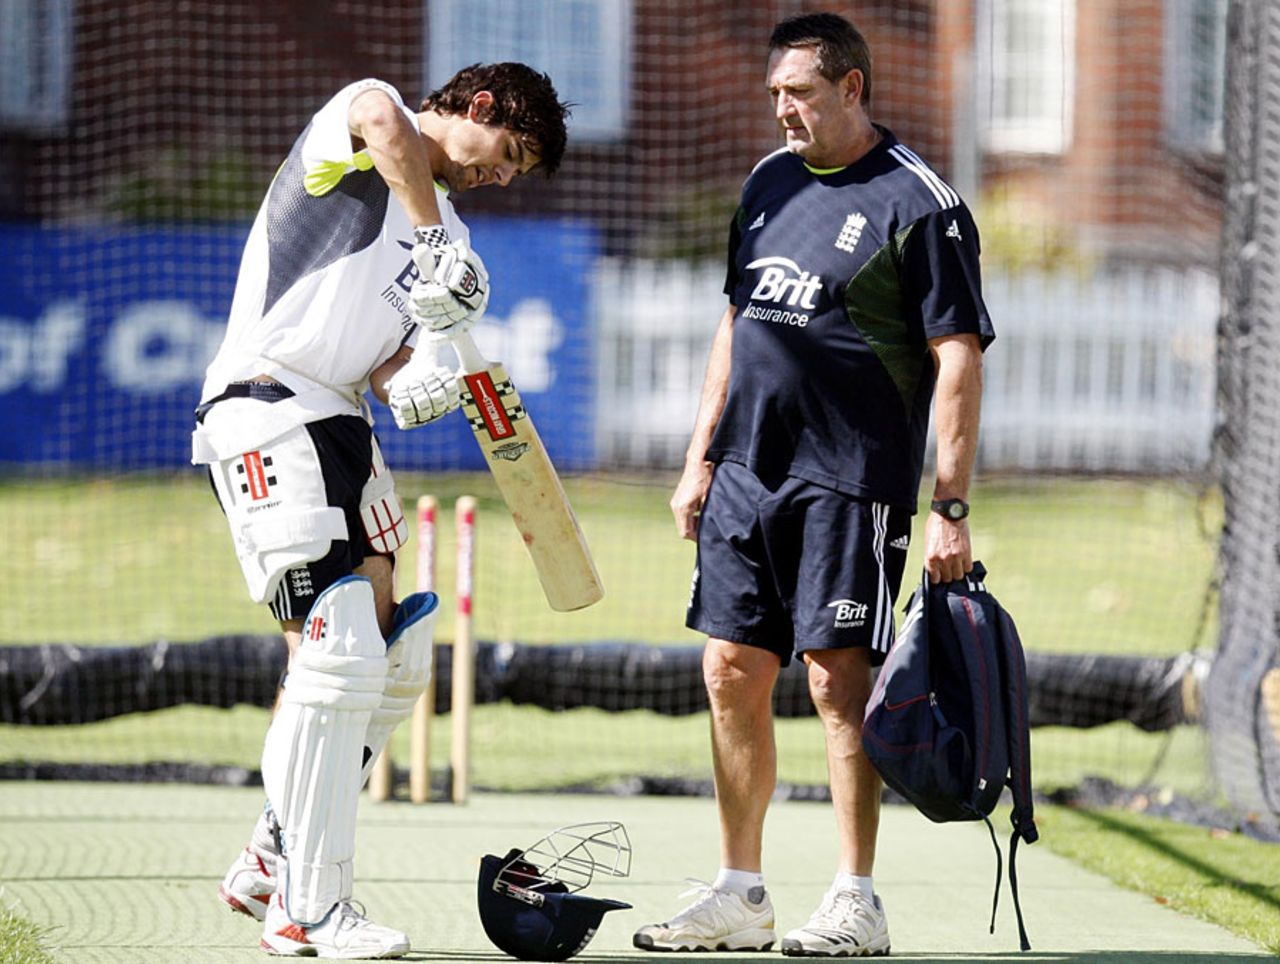 Despite his return to form, Alastair Cook continues to work hard in the nets with Graham Gooch, Lord's, August 24, 2010